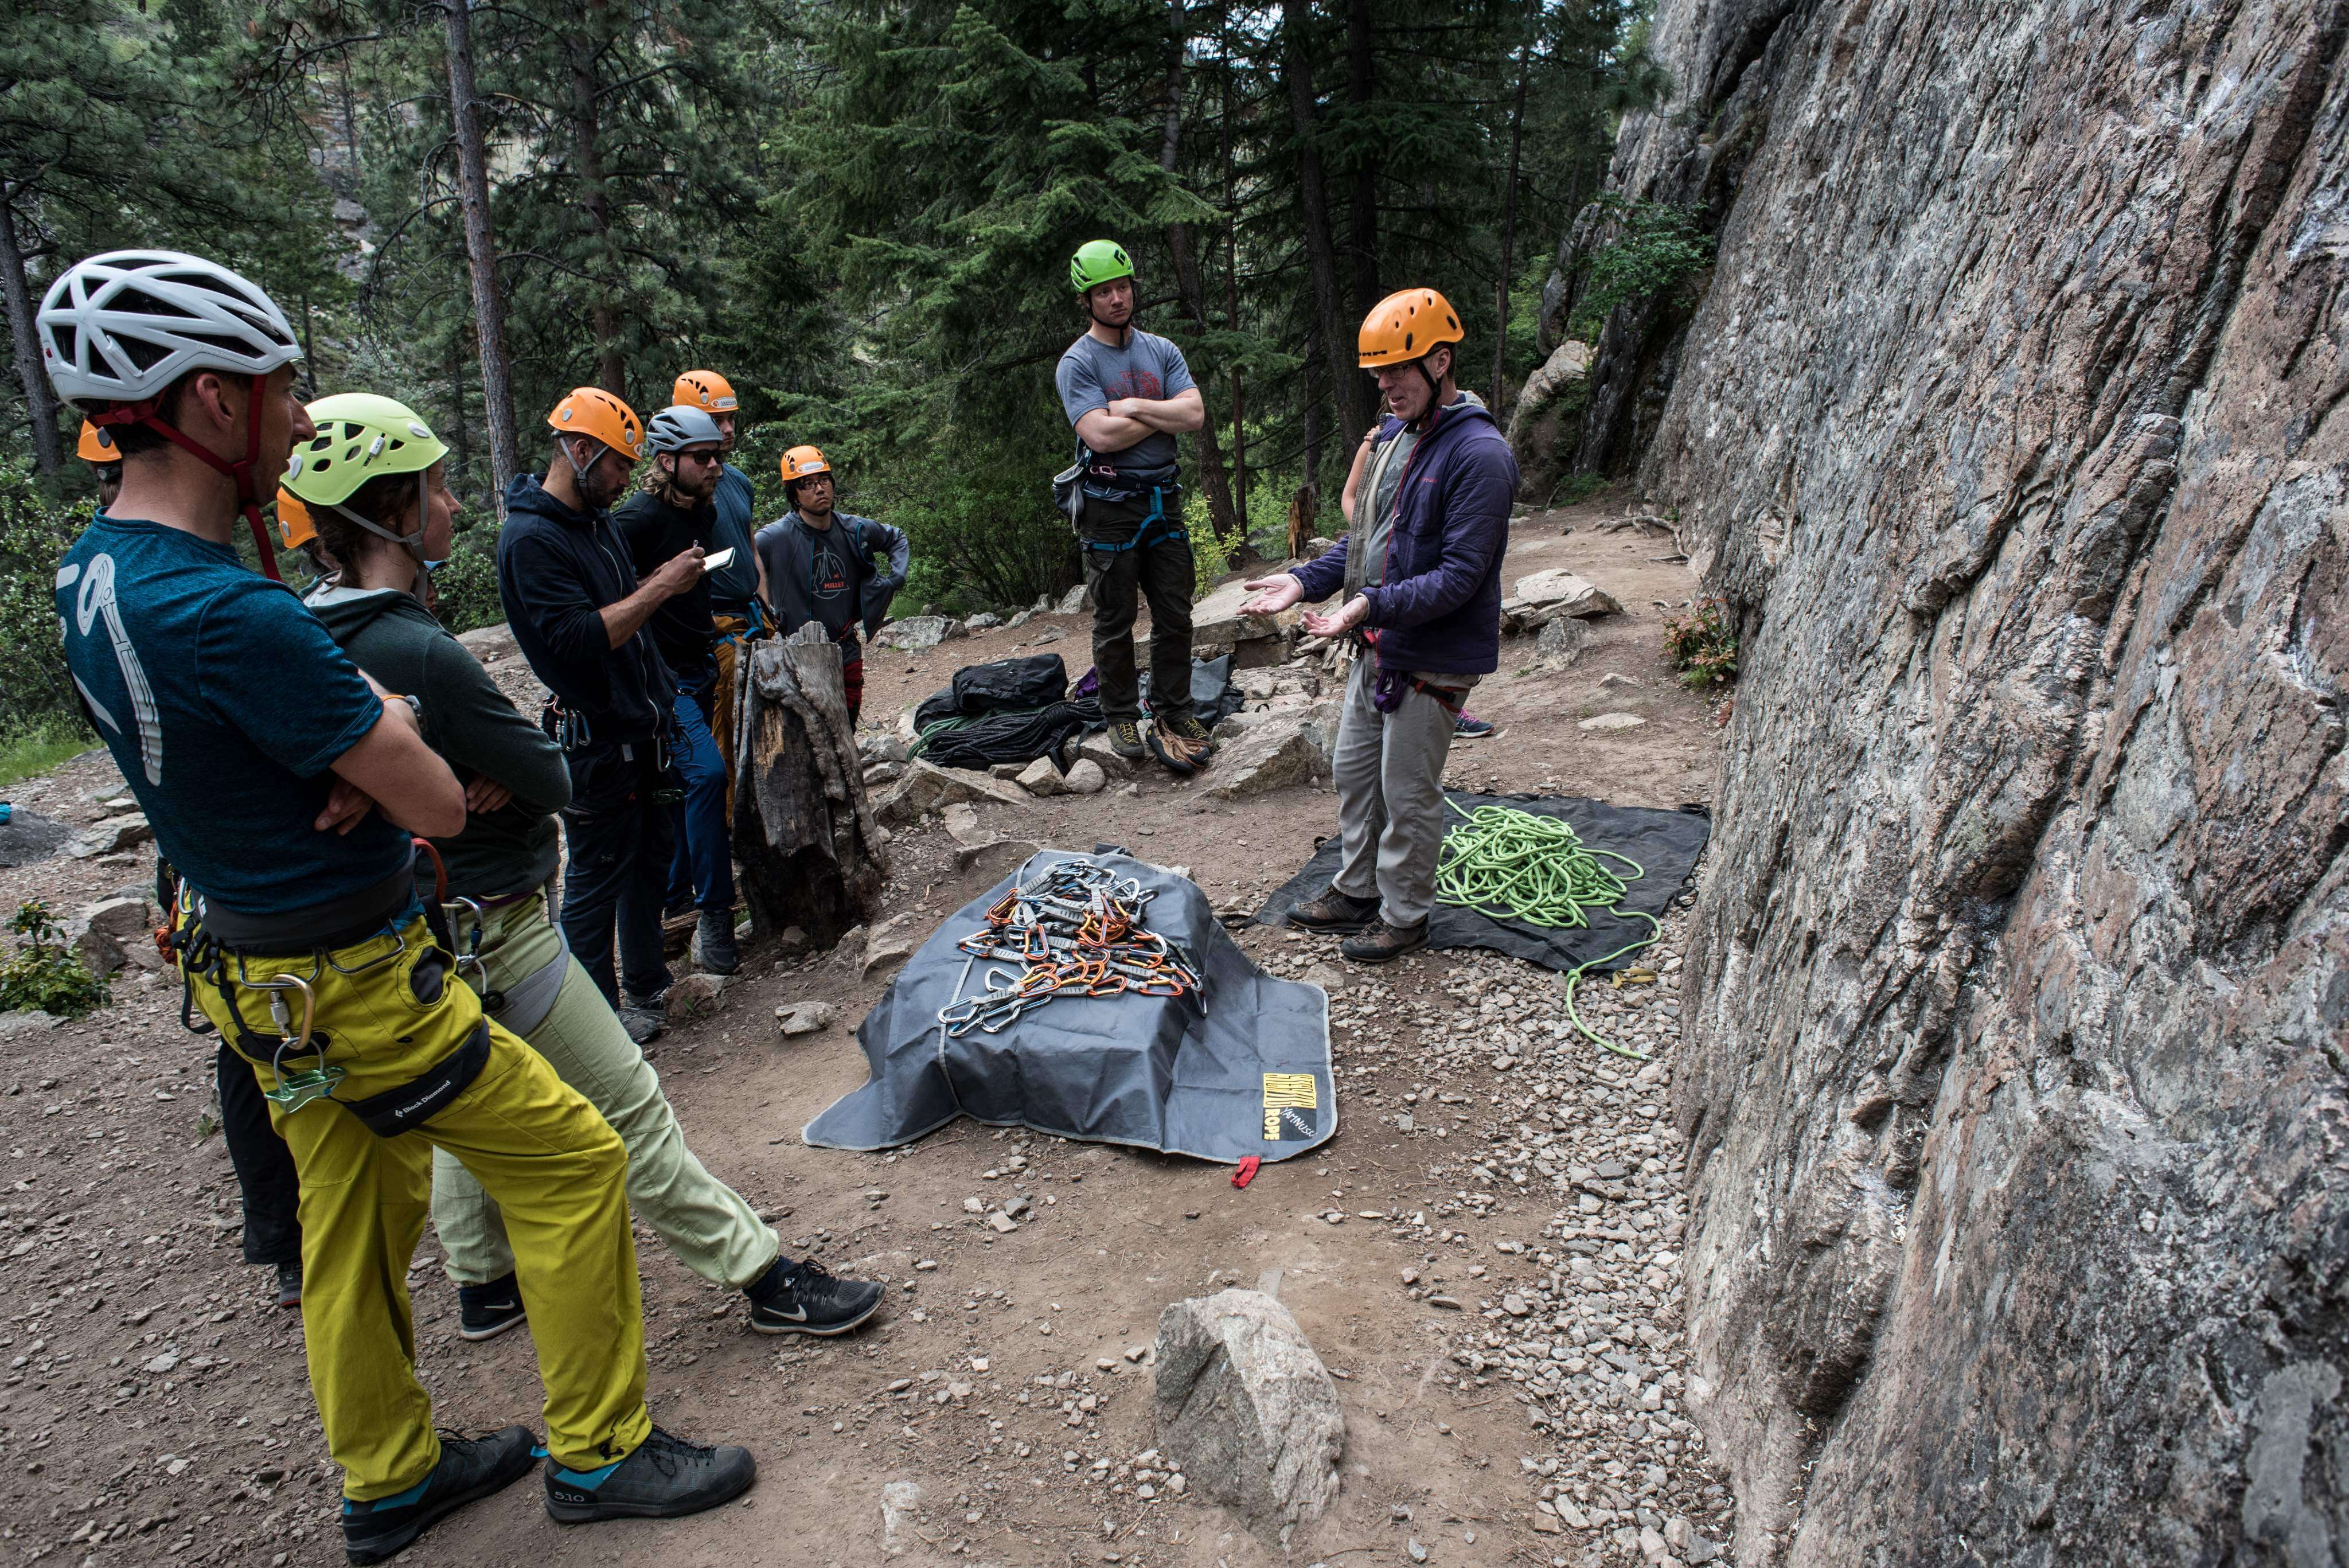 Group of rock climbers getting ready for a rock climbing course at Skaha Rock @evazolaphoto